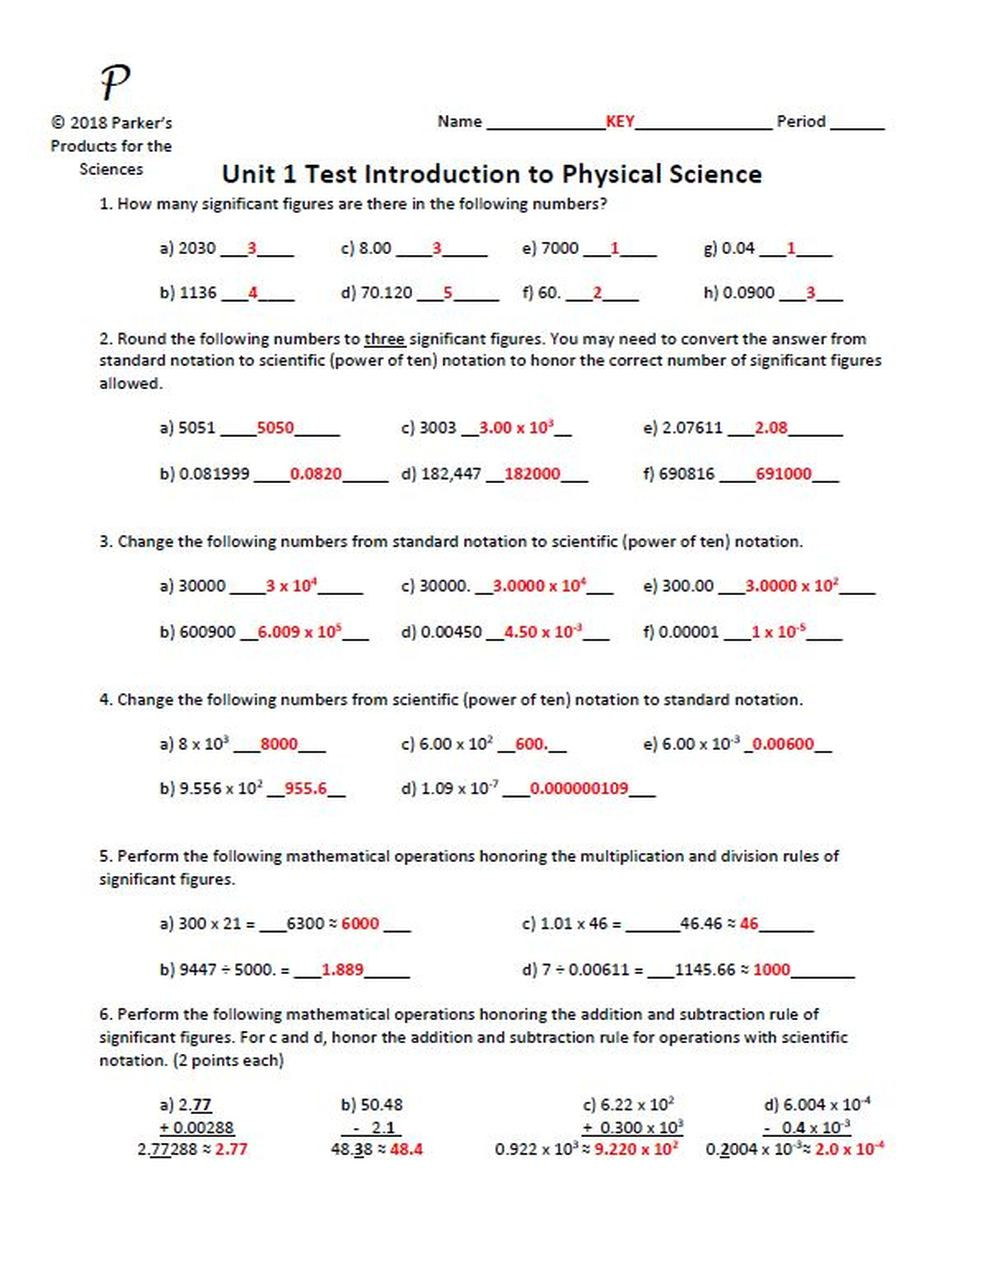 Scientific Notation Worksheet Answer Key Significant Figures Metric Conversions Graphing and Scientific Notation Unit Test